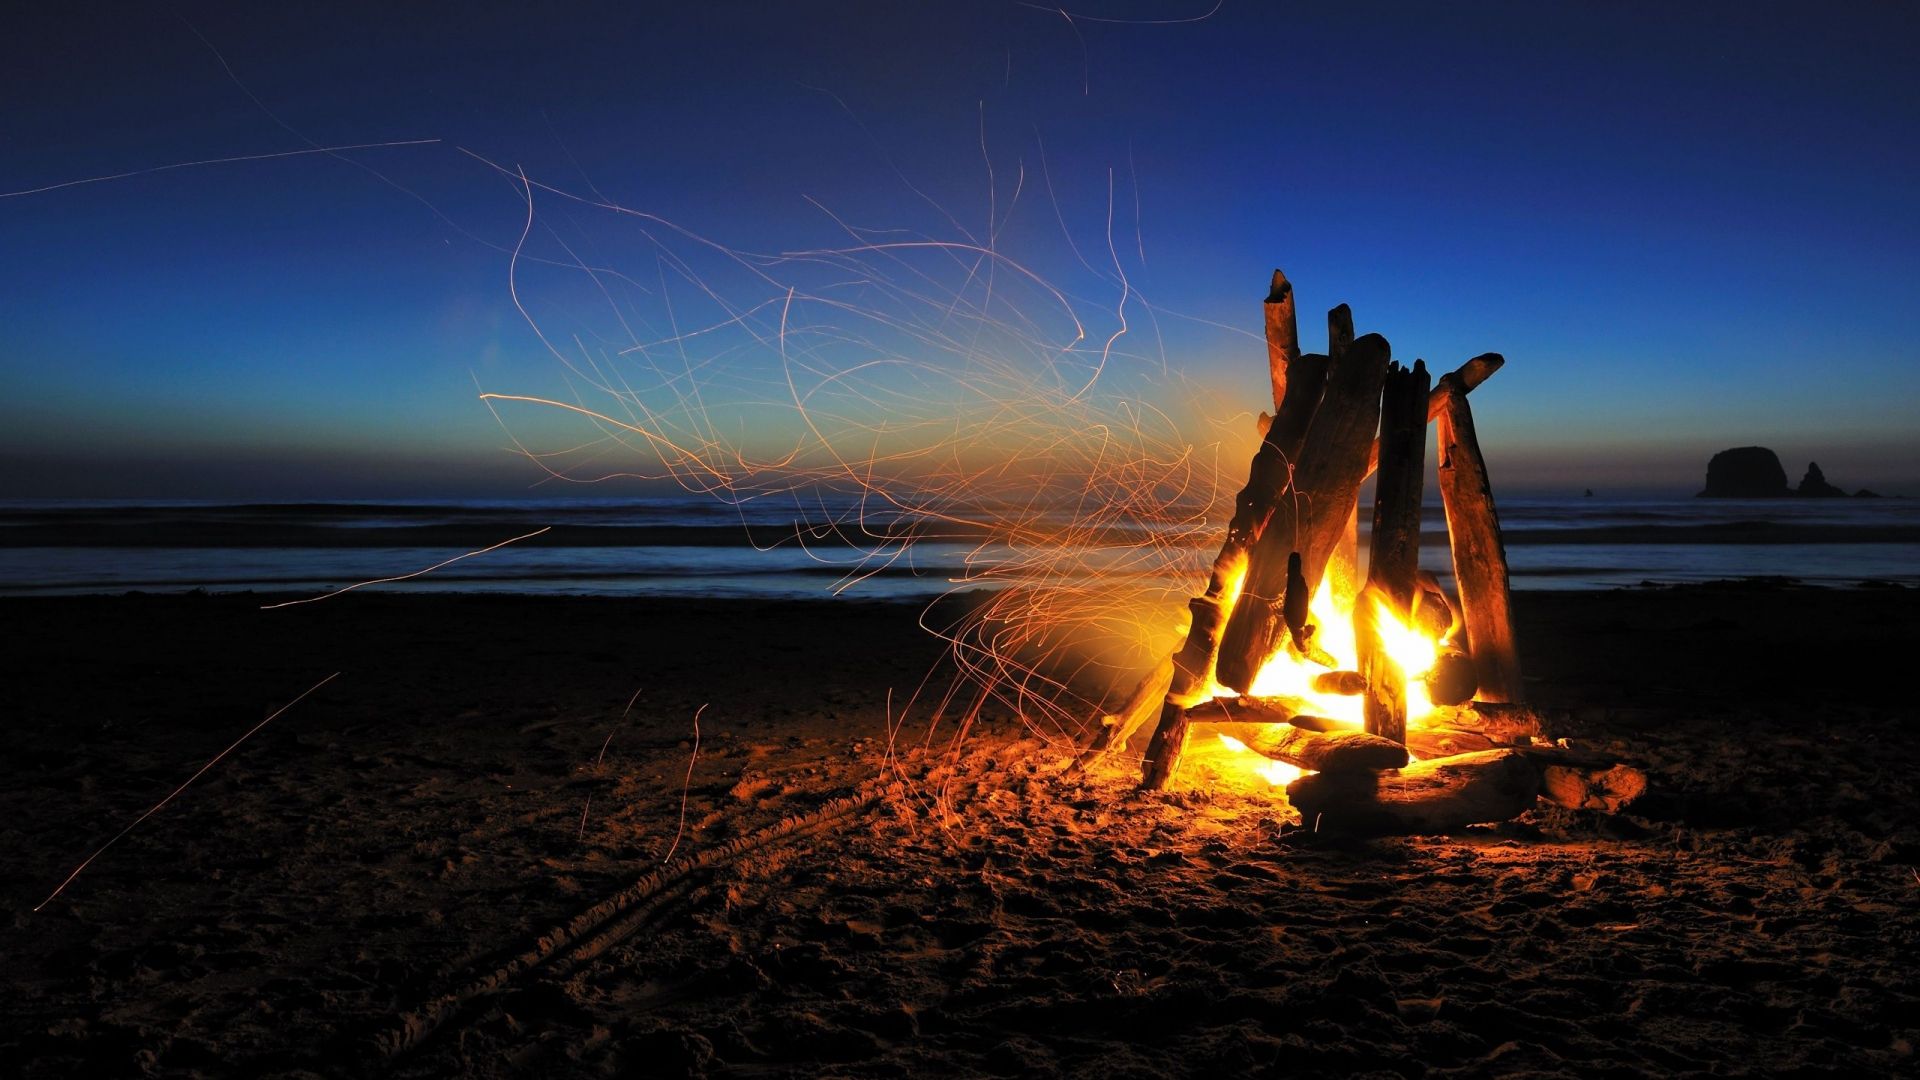 Free download Fire Beach Night Timelapse Sparks Camp Camping